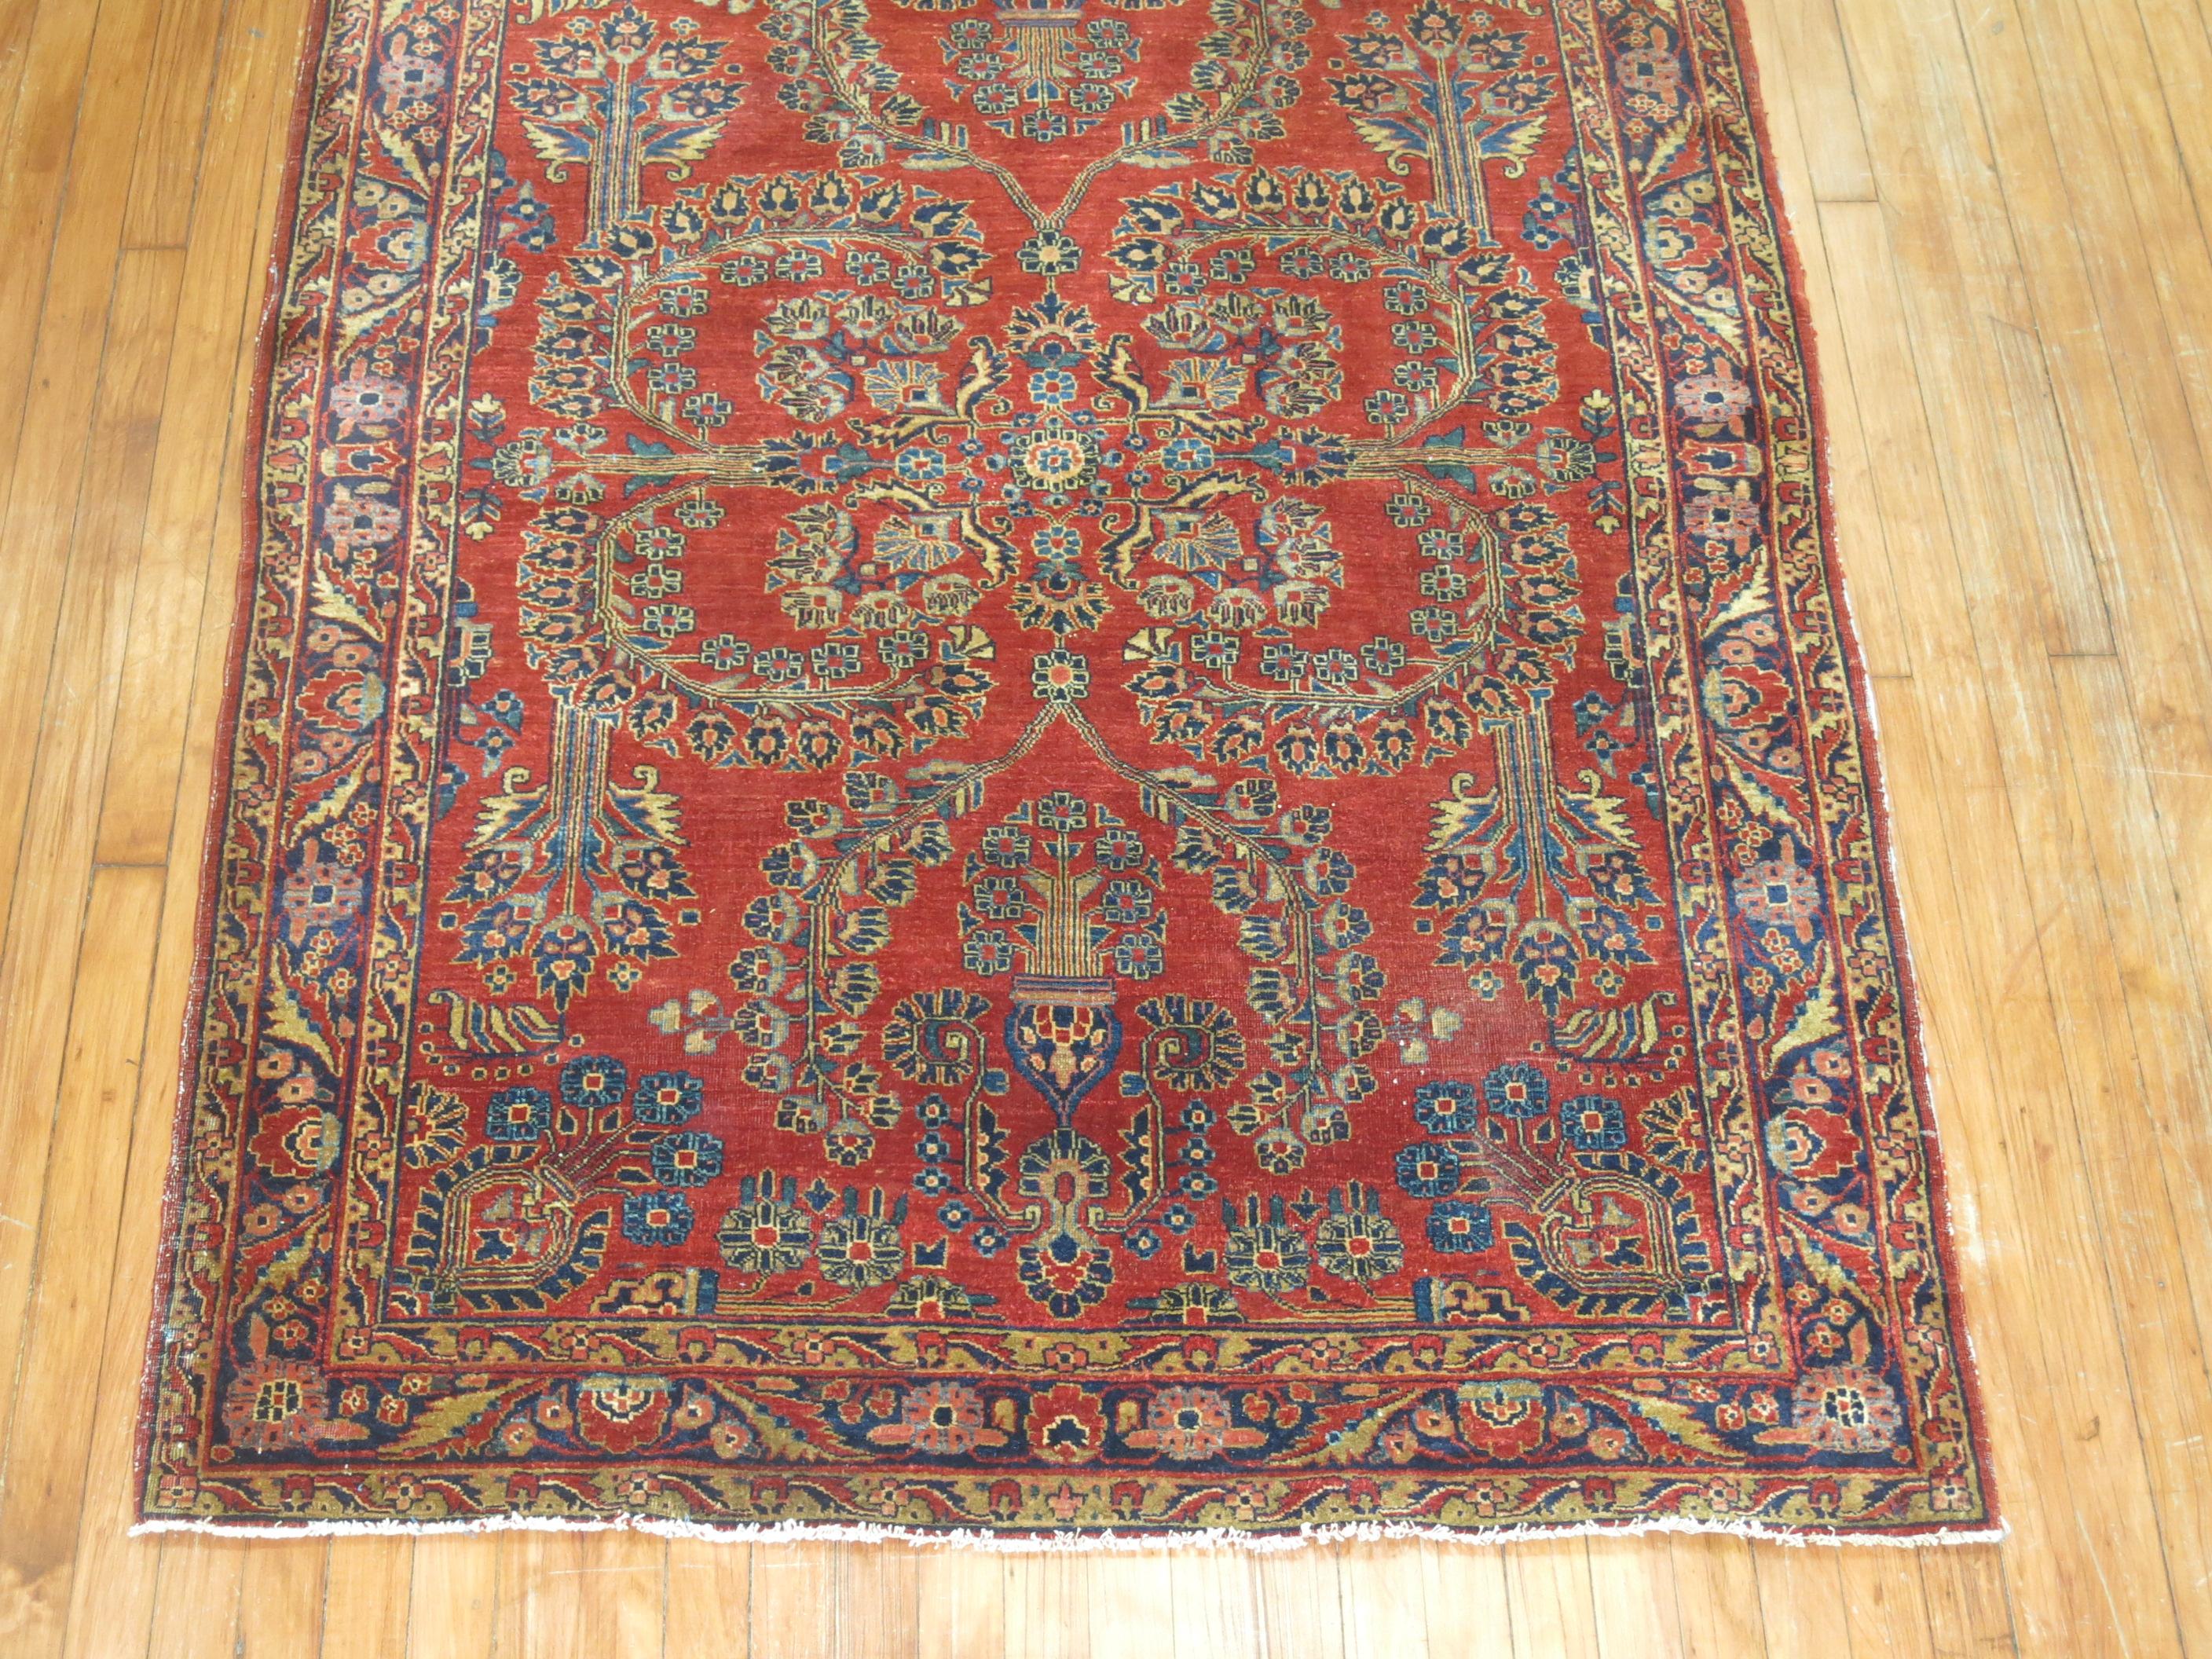 an early 20th Century Persian Red Sarouk Rug

Details
rug no.	9061
size	4' 4